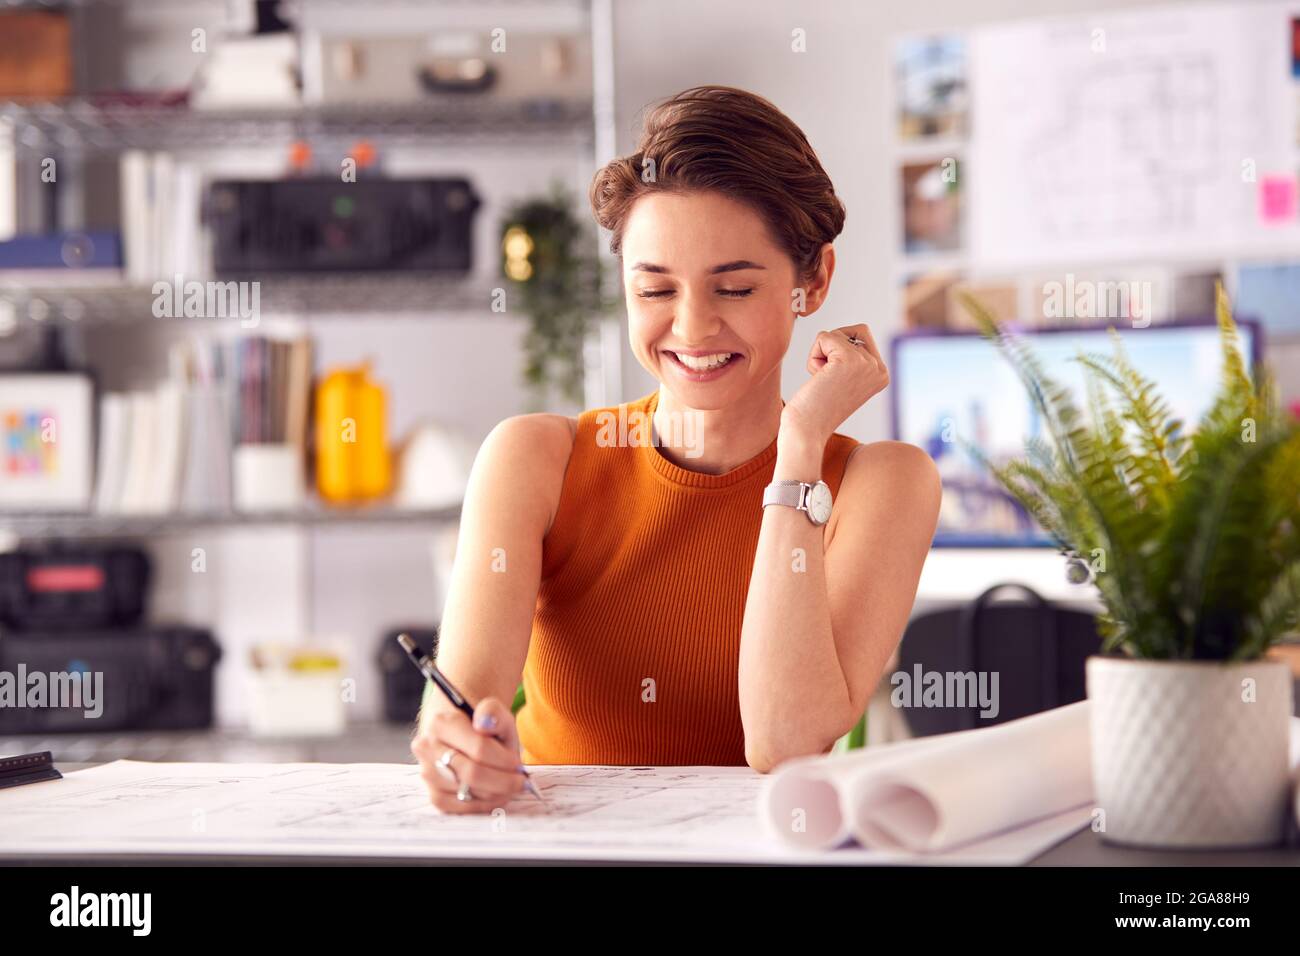 Female Architect In Office Working At Desk Making Notes On Plan Or Blueprint Stock Photo